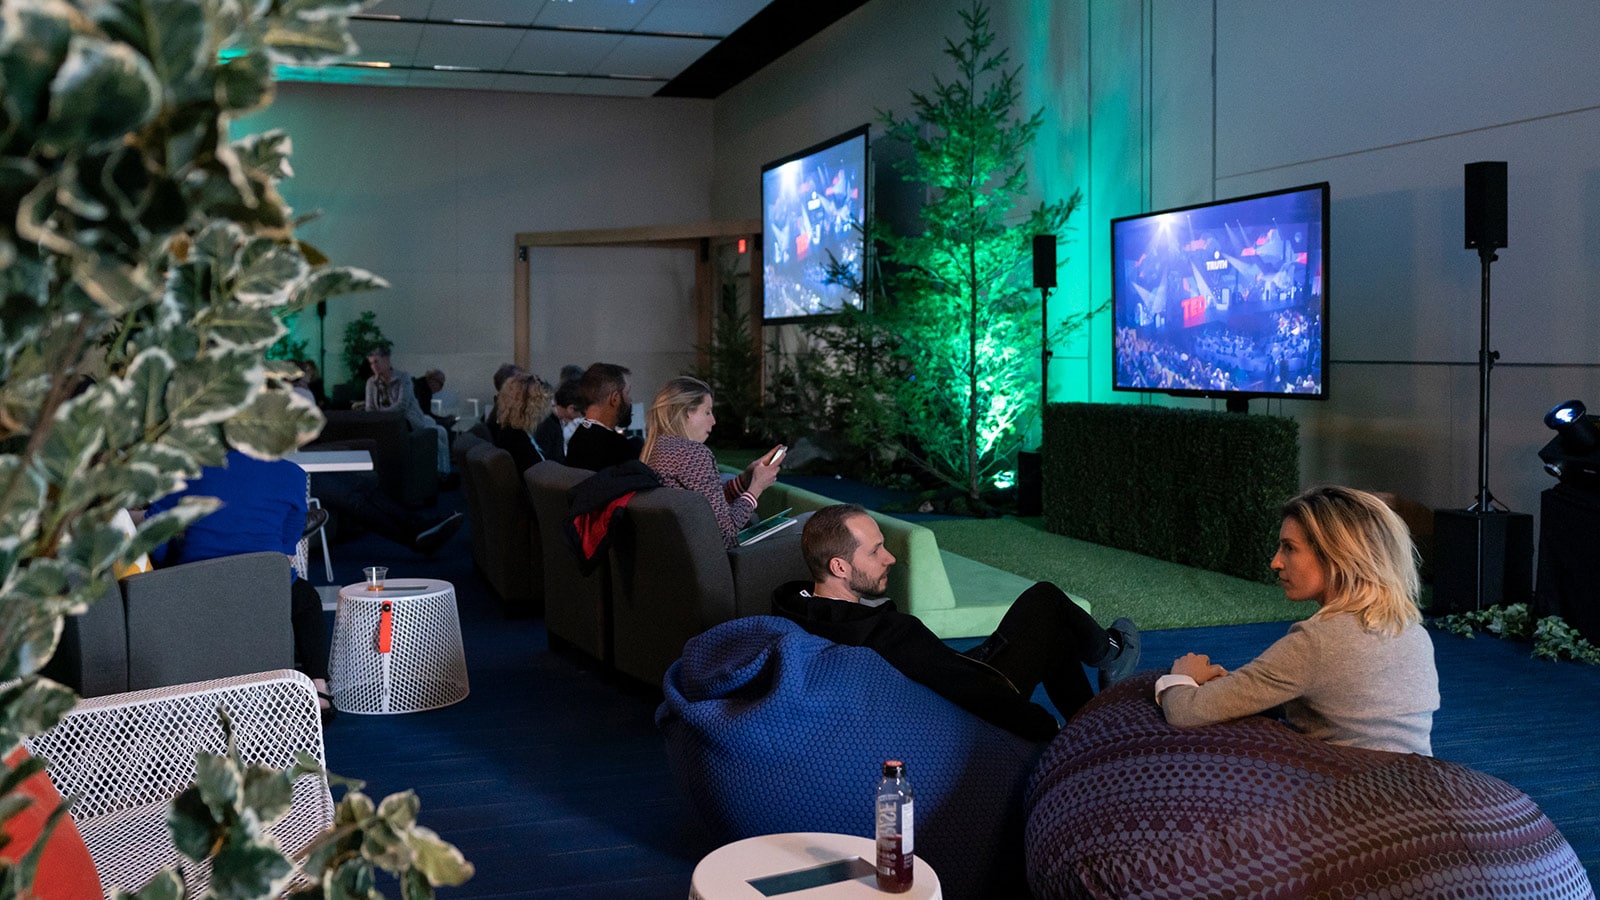 Champagne Simulcast Celebration at TED2019: Bigger Than Us. April 15 - 19, 2019, Vancouver, BC, Canada.